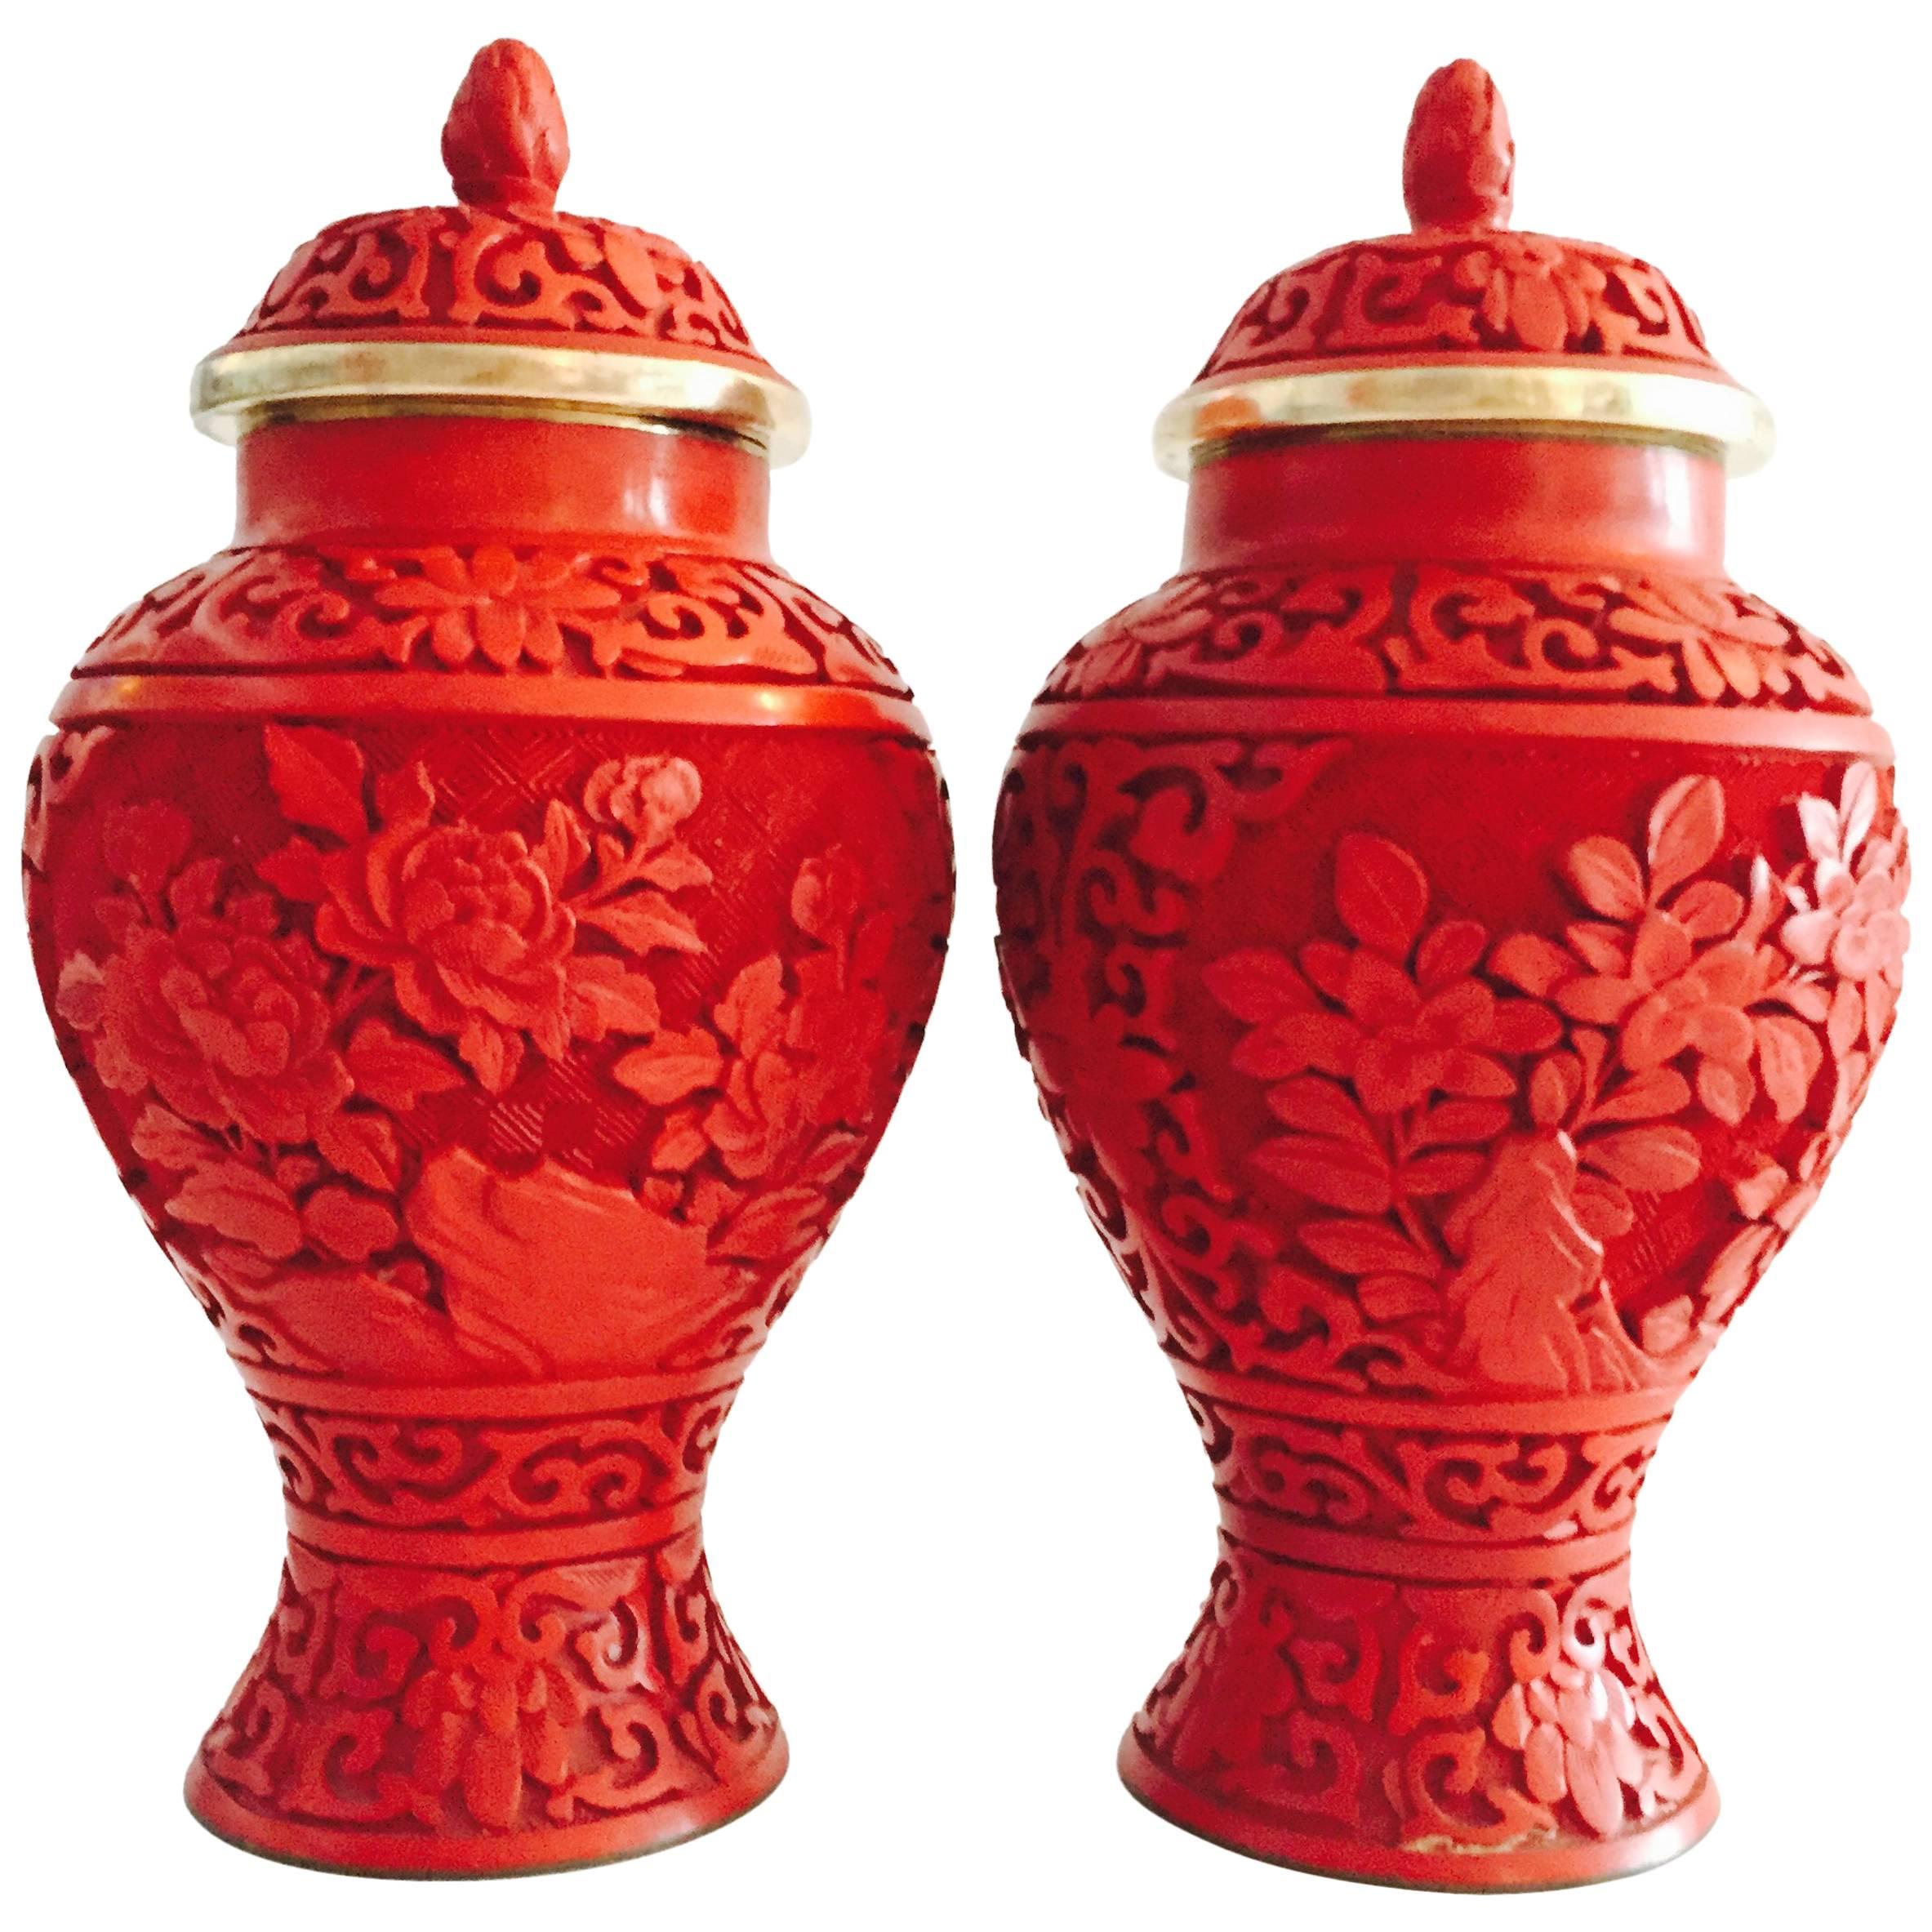 Pair of Chinese Cinnabar and Cloisonné Lidded Jars